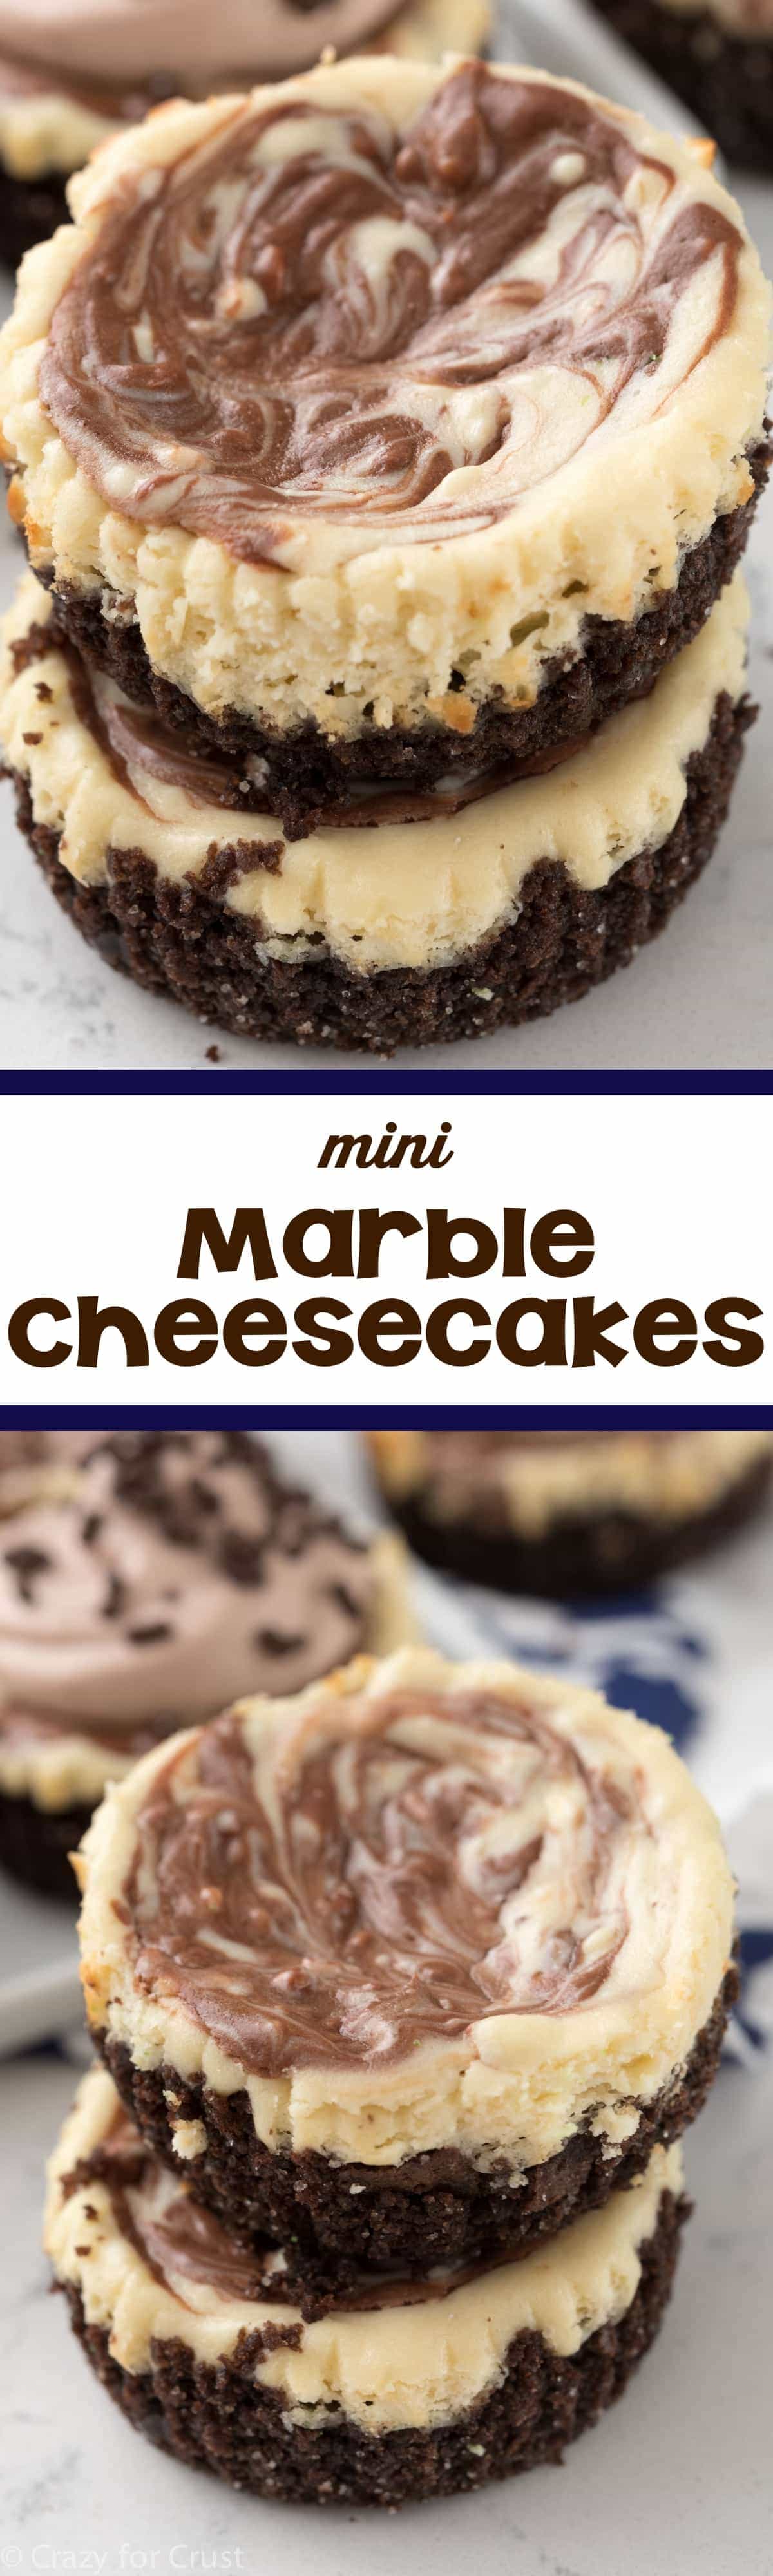 Mini Marble Cheesecakes - these easy mini cheesecakes are marbled with chocolate. These are perfect all year long!